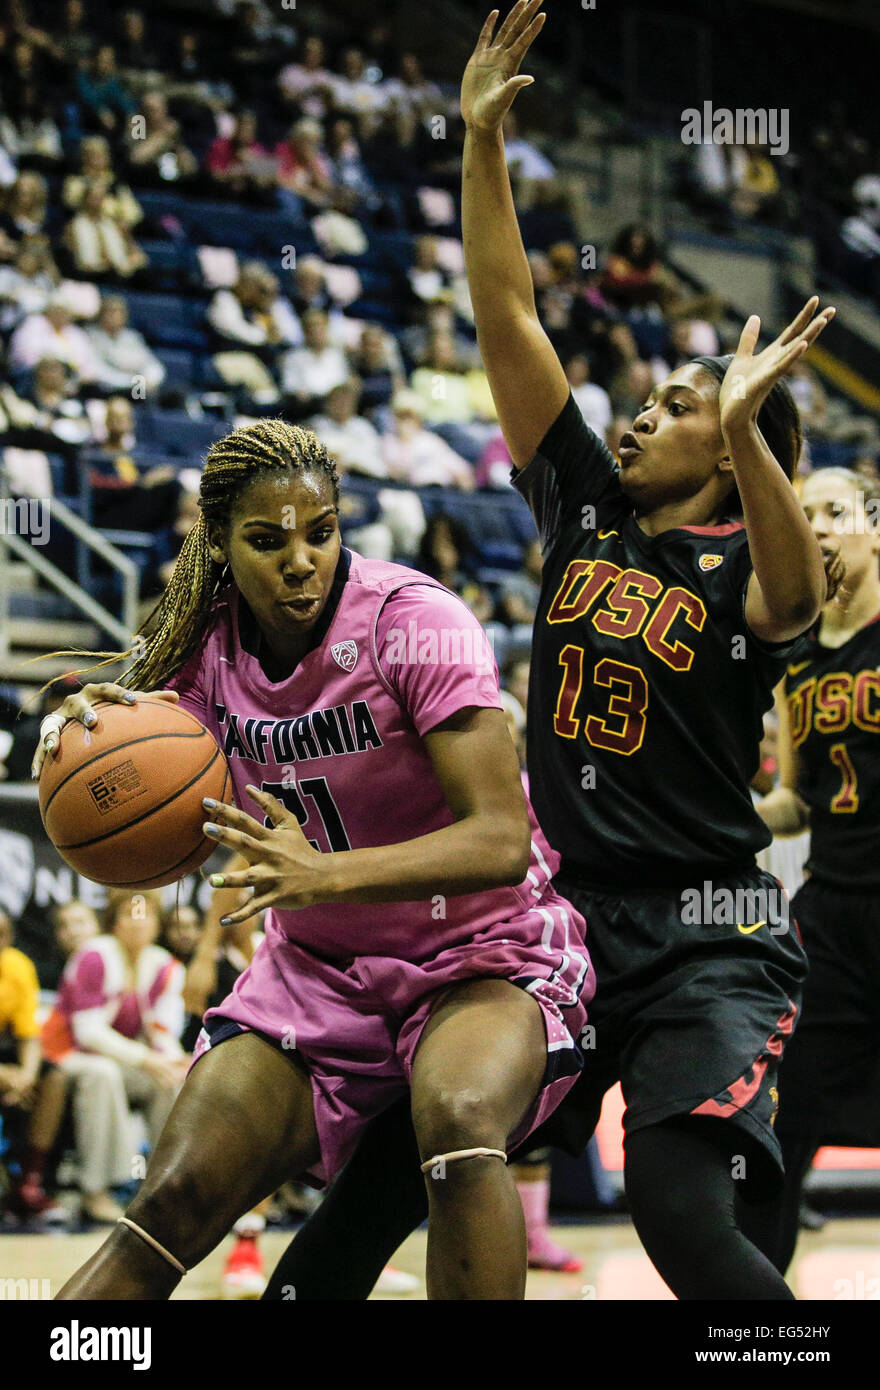 Berkeley CA. 15th Feb, 2015. California F # 21 Reshanda Gray on the baseline force her way in the paint and score during NCAA Women's Basketball game between USC Trojans and California Golden Bears 54-65 lost at Hass Pavilion Berkeley Calif. © csm/Alamy Live News Stock Photo